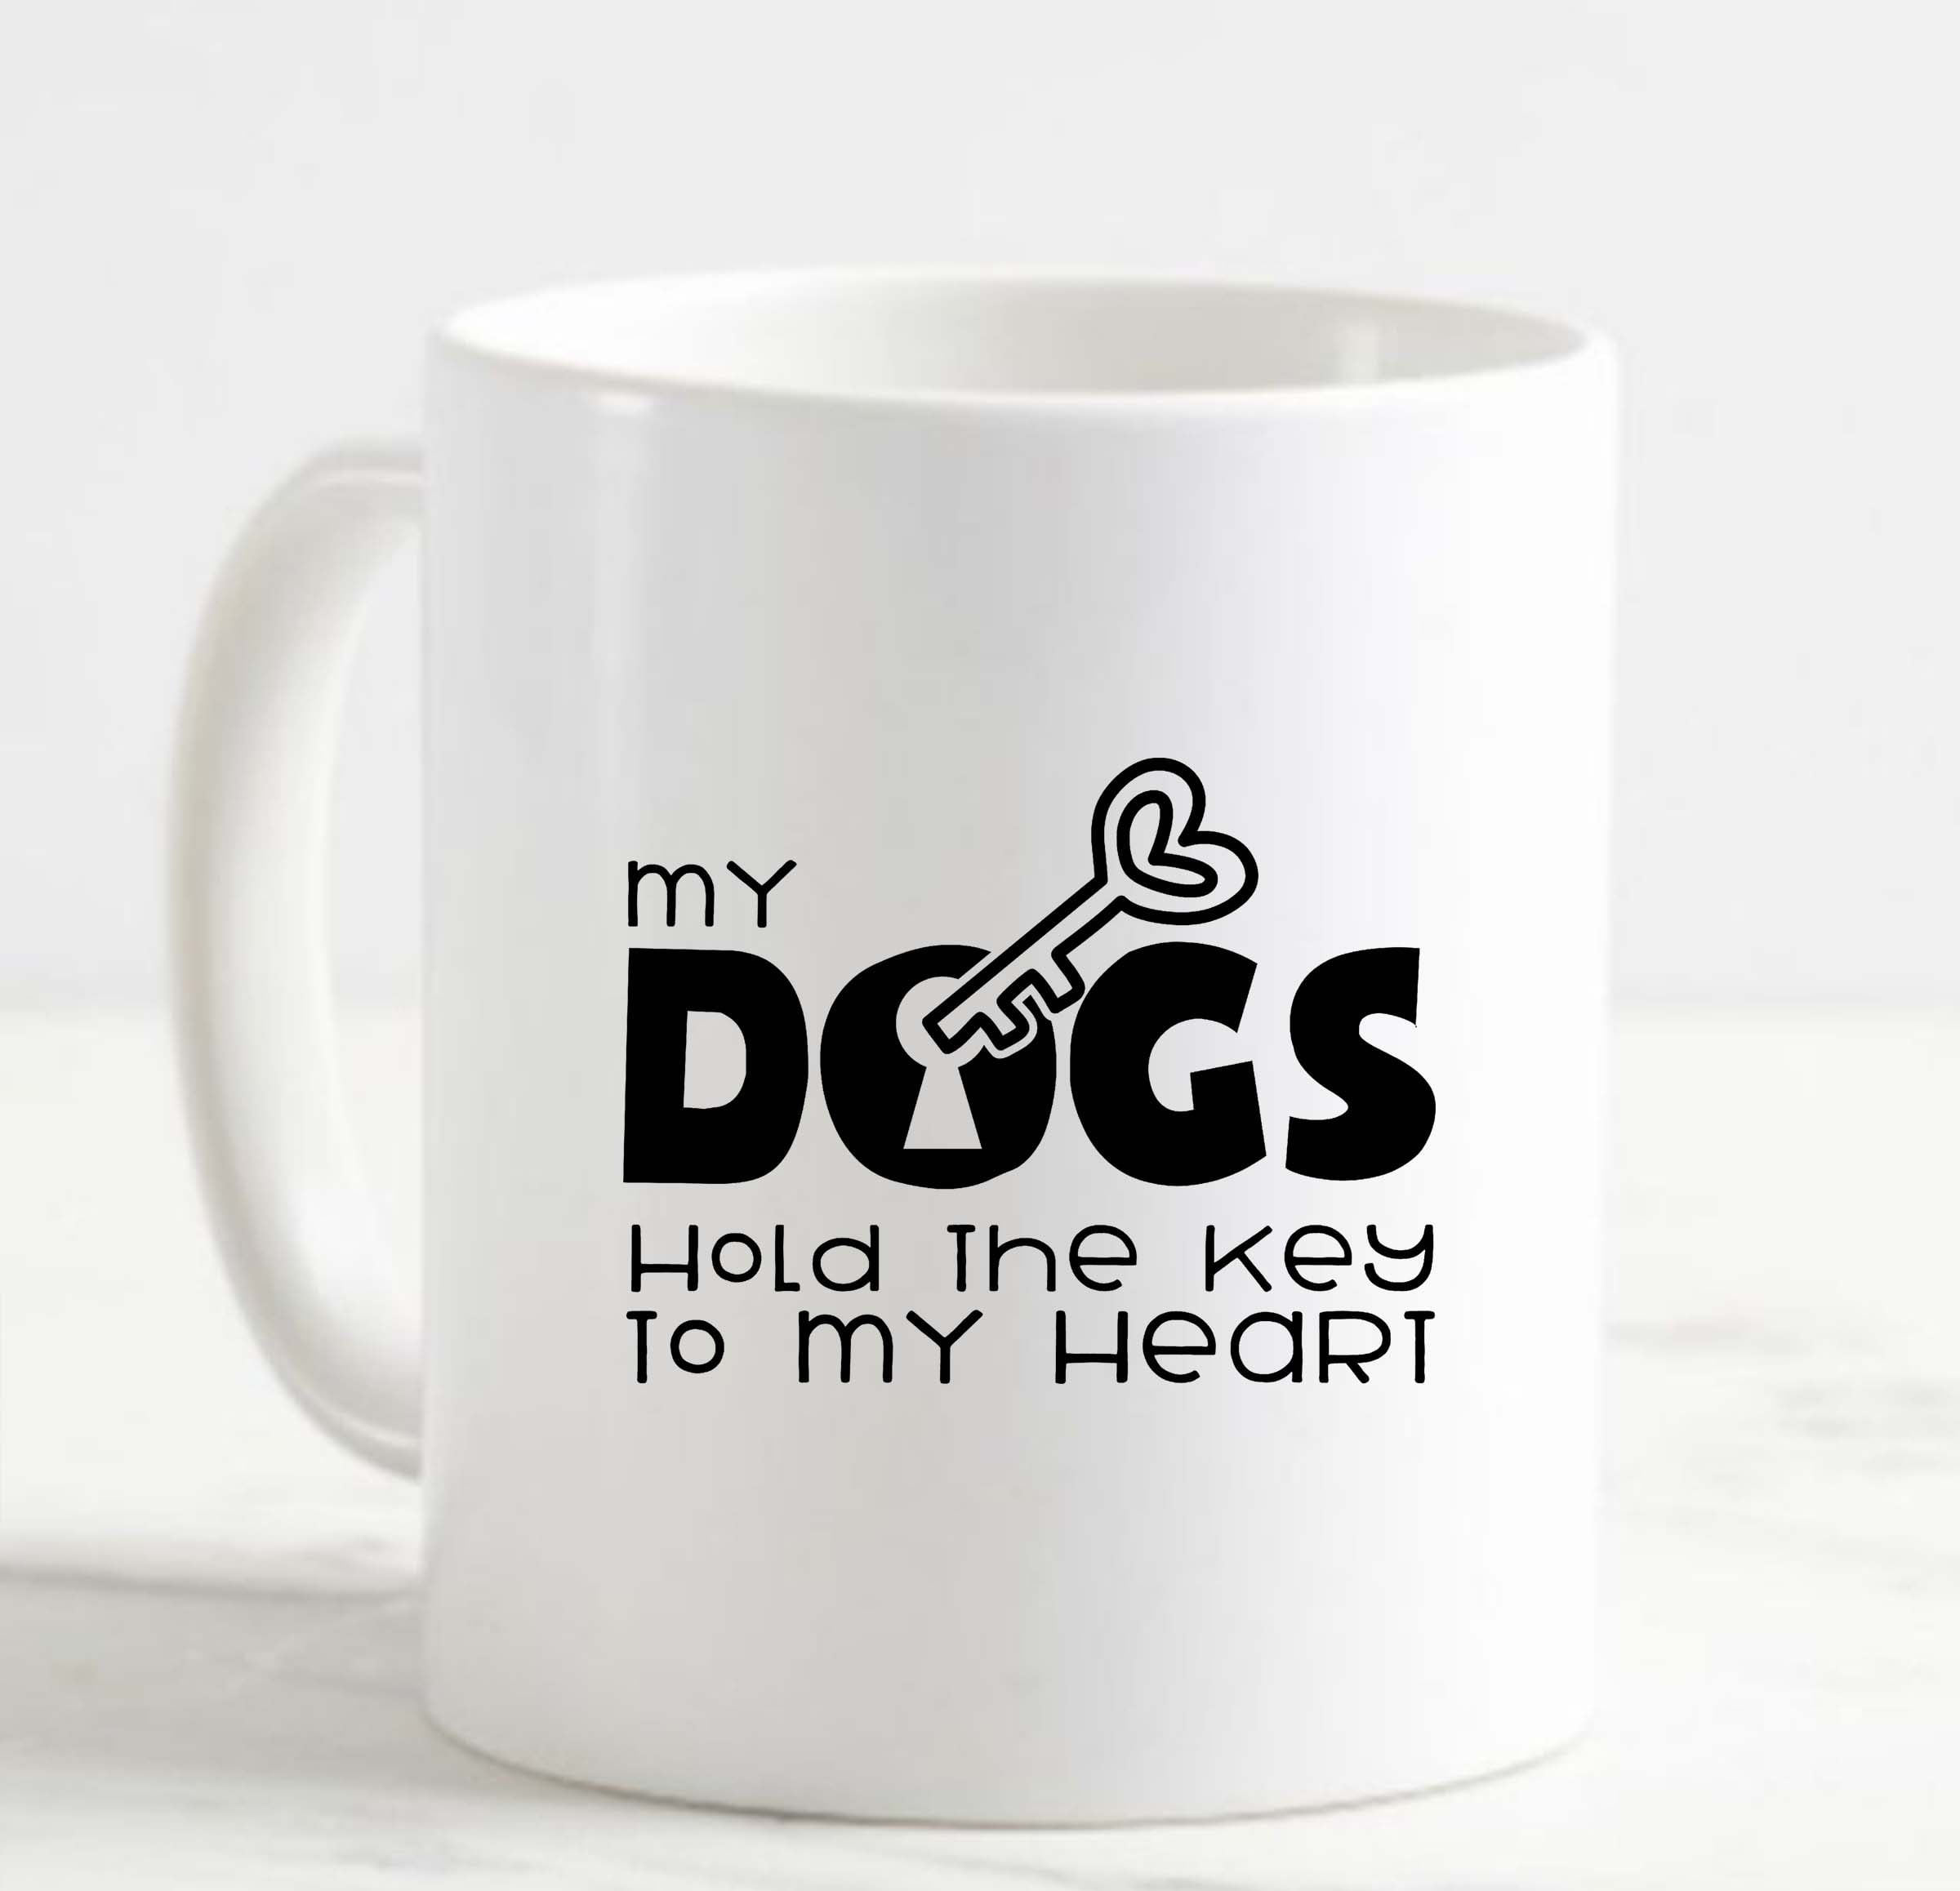 Coffee Mug My Dogs Hold The Key To My Heart Love Animals White Cup Funny  Gifts for work office him her 